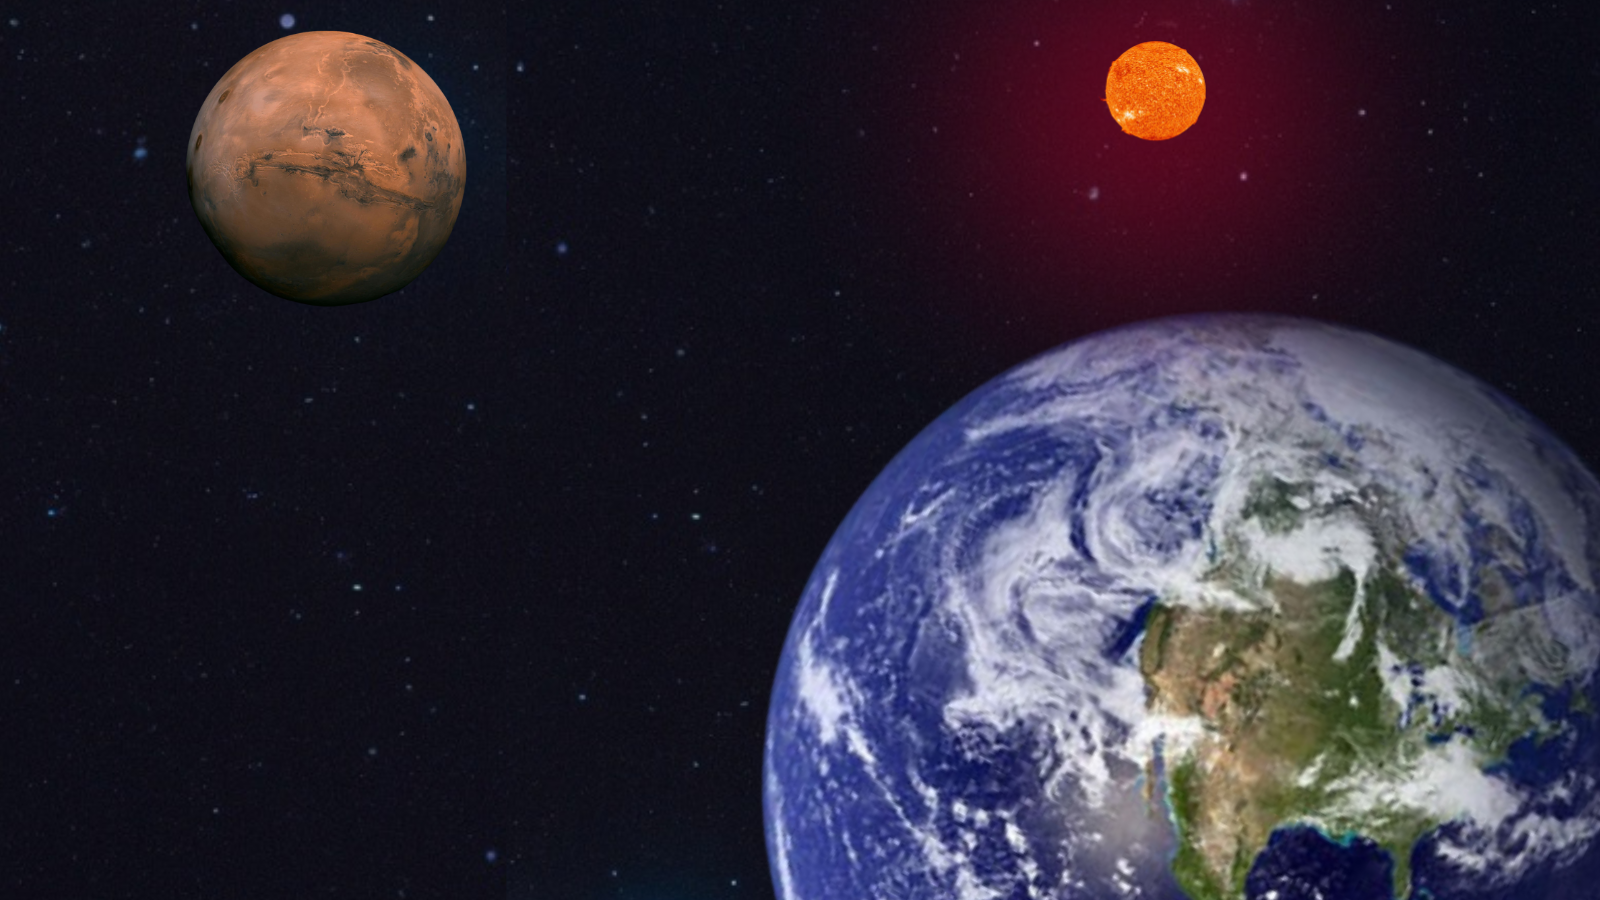 Mars attracts: How the Red Planet influences Earth’s climate and seas Space